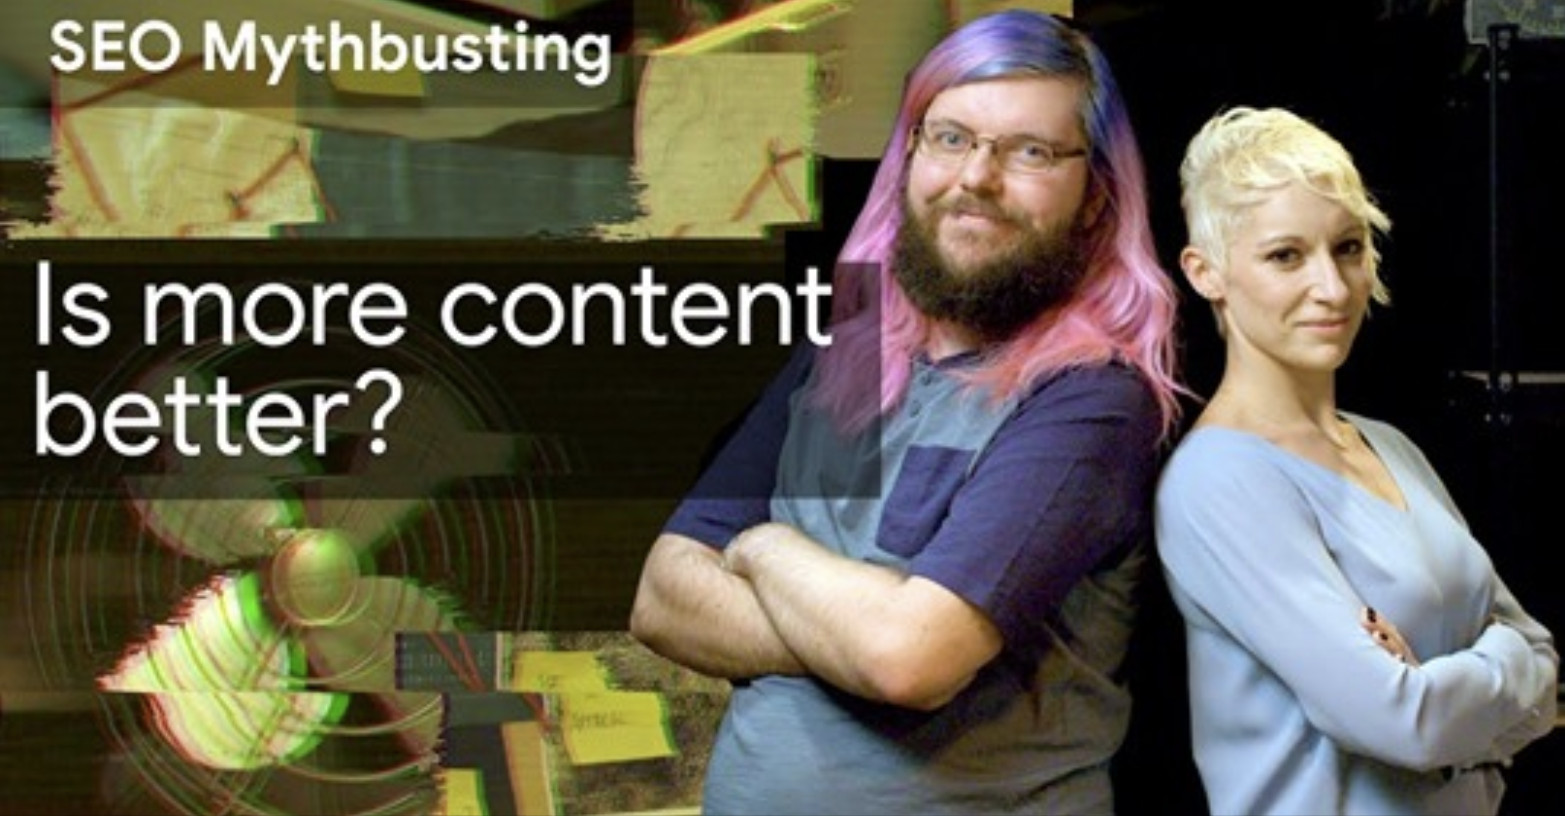 SEO Myth Busting: Is more content better?